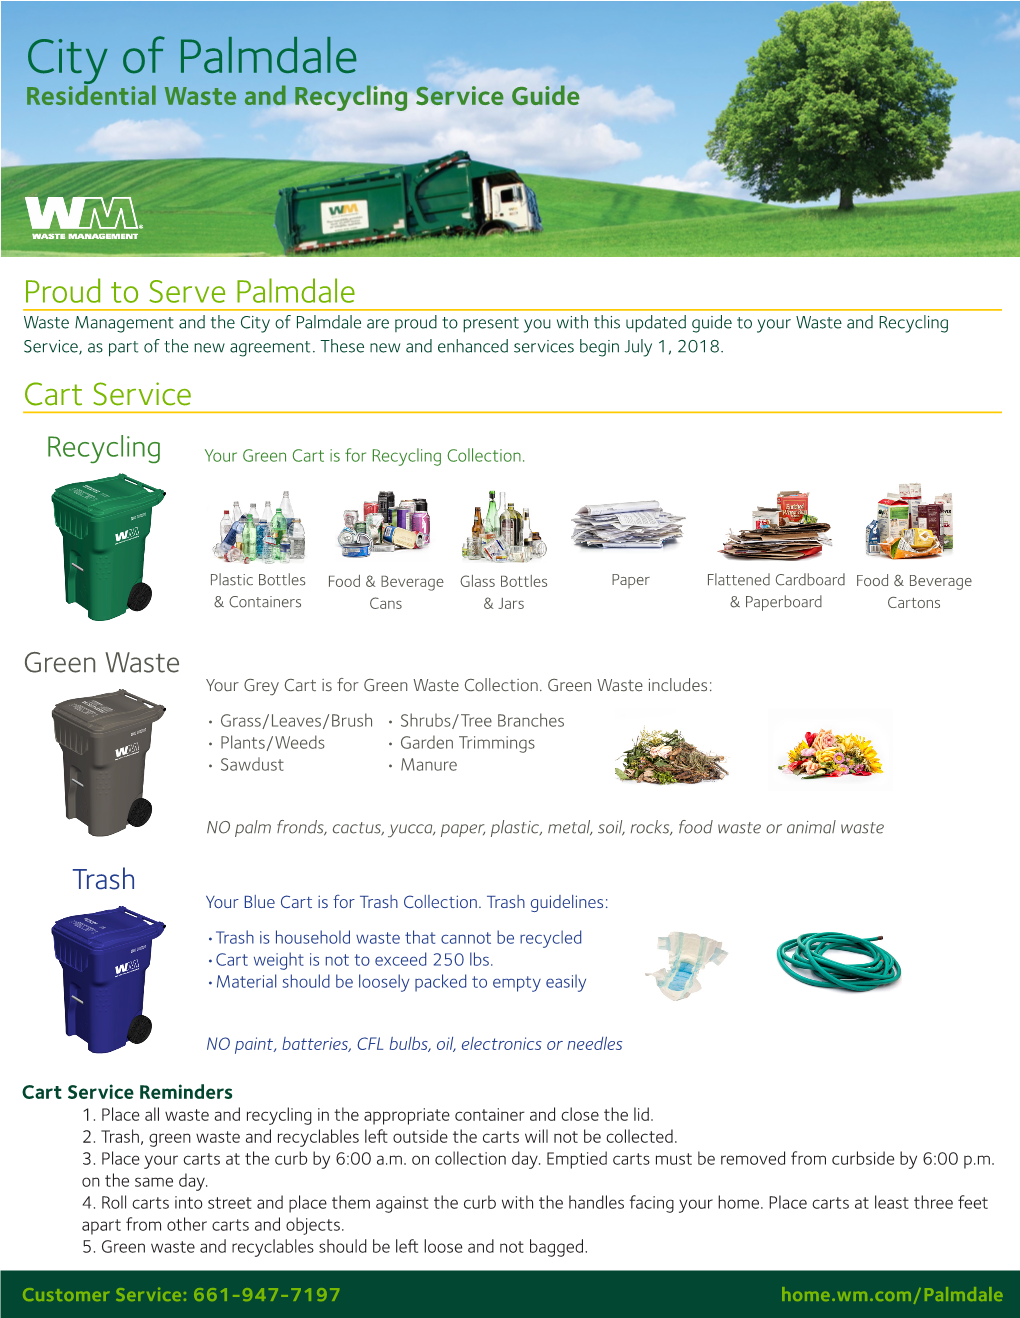 City of Palmdale Residential Waste and Recycling Service Guide